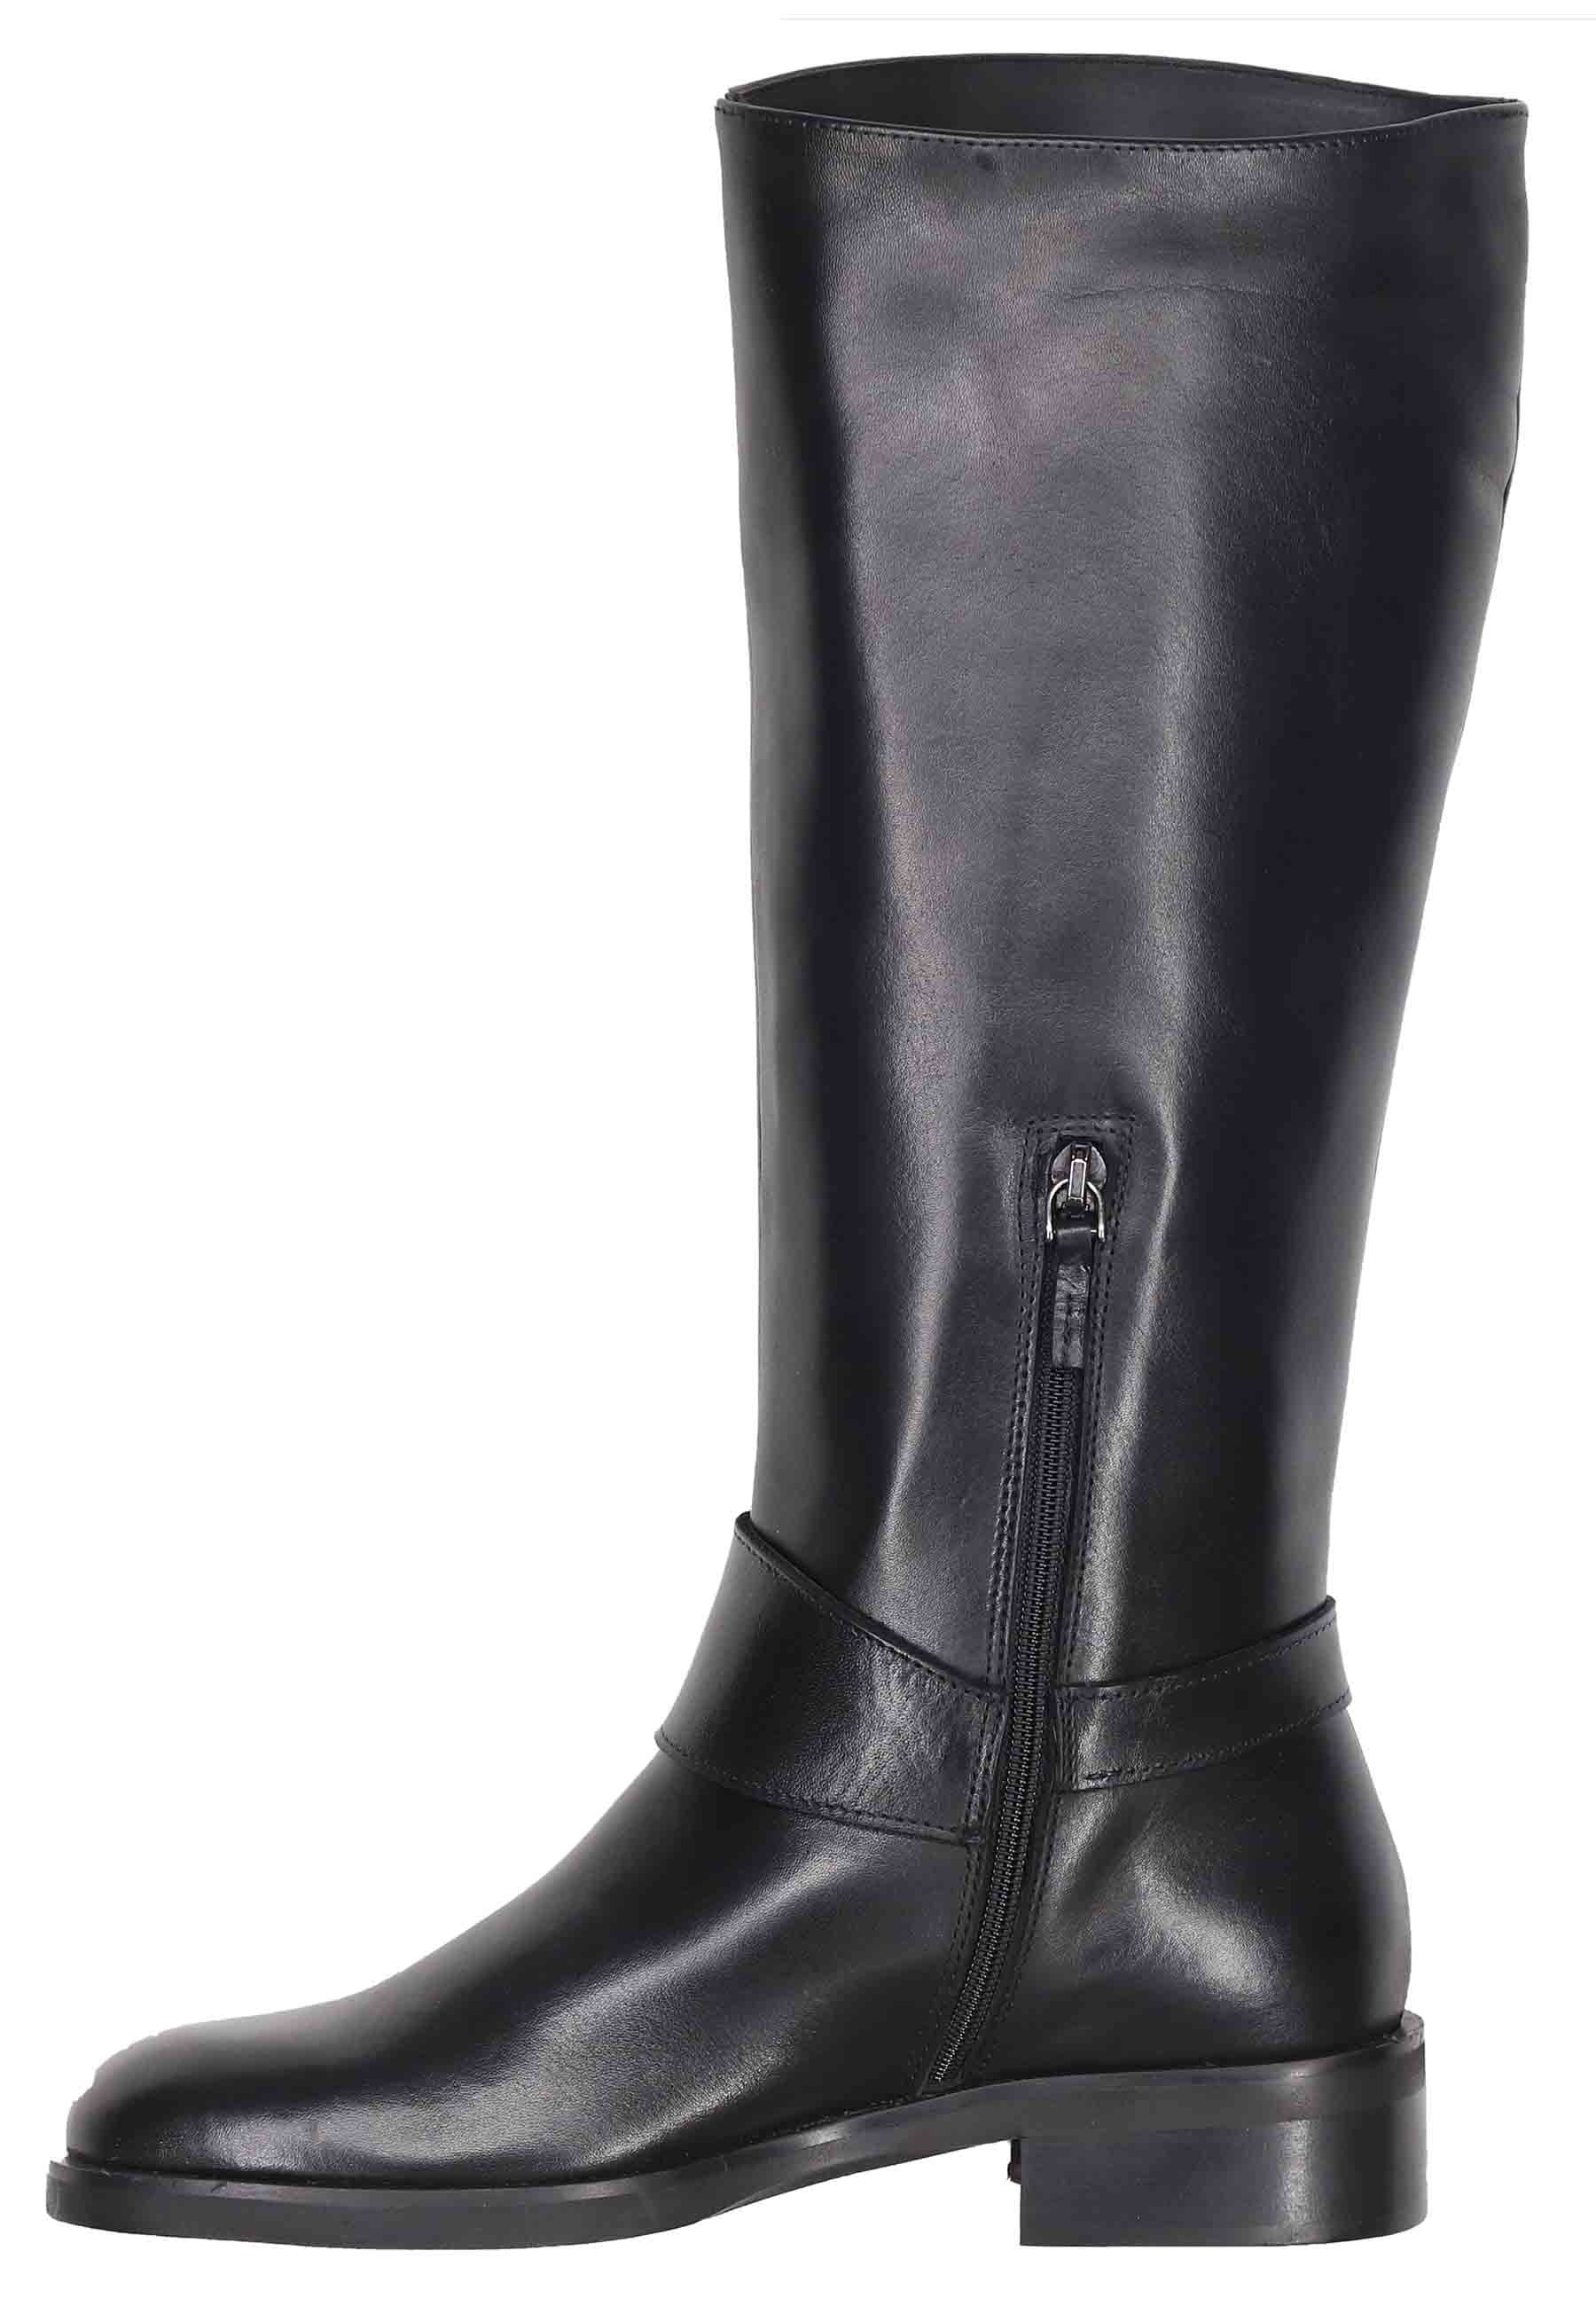 Women's black leather boots with low heel buckle